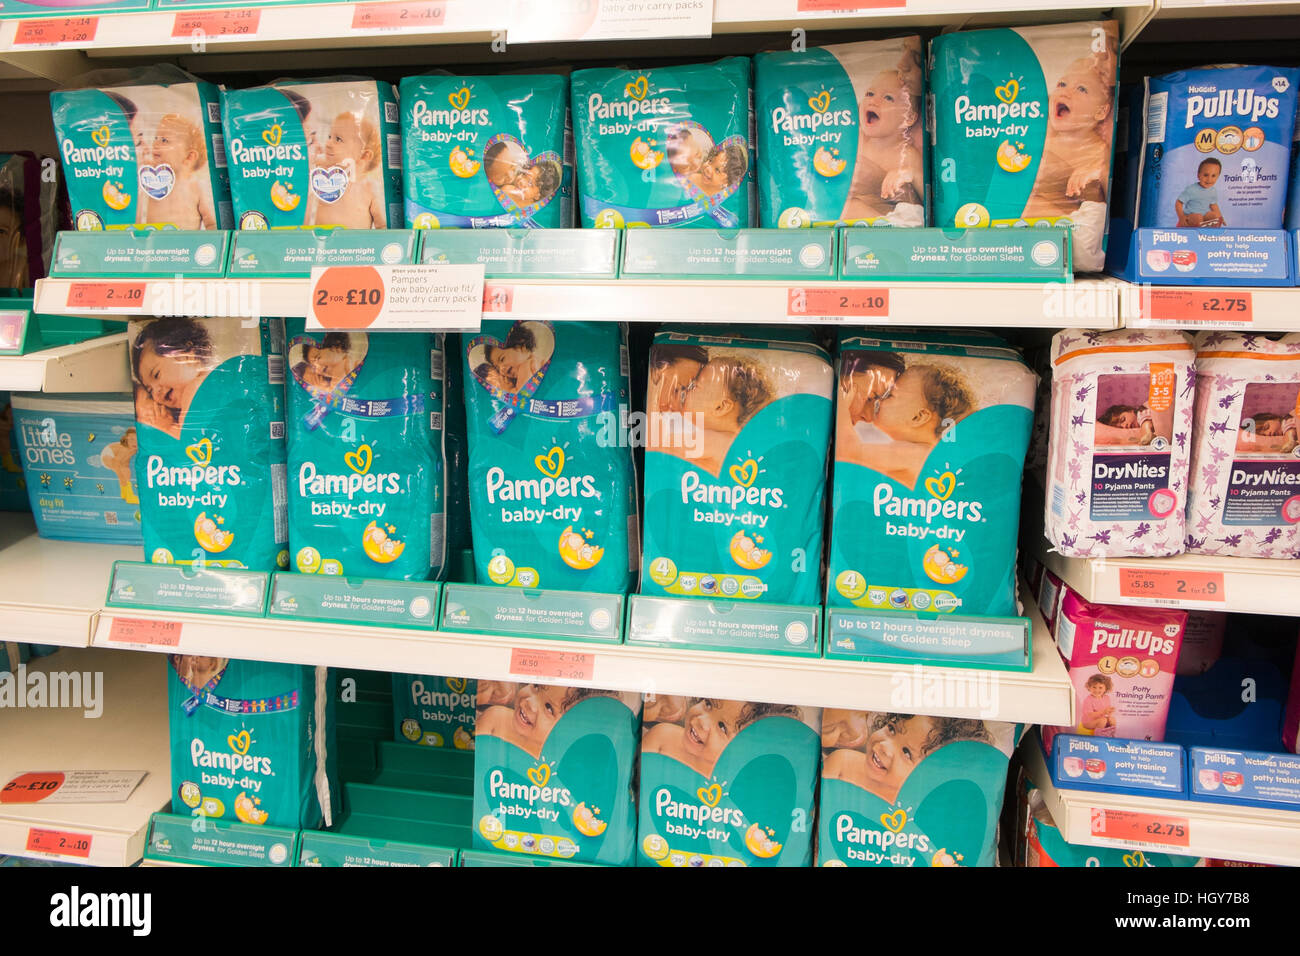 pampers overnight nappies